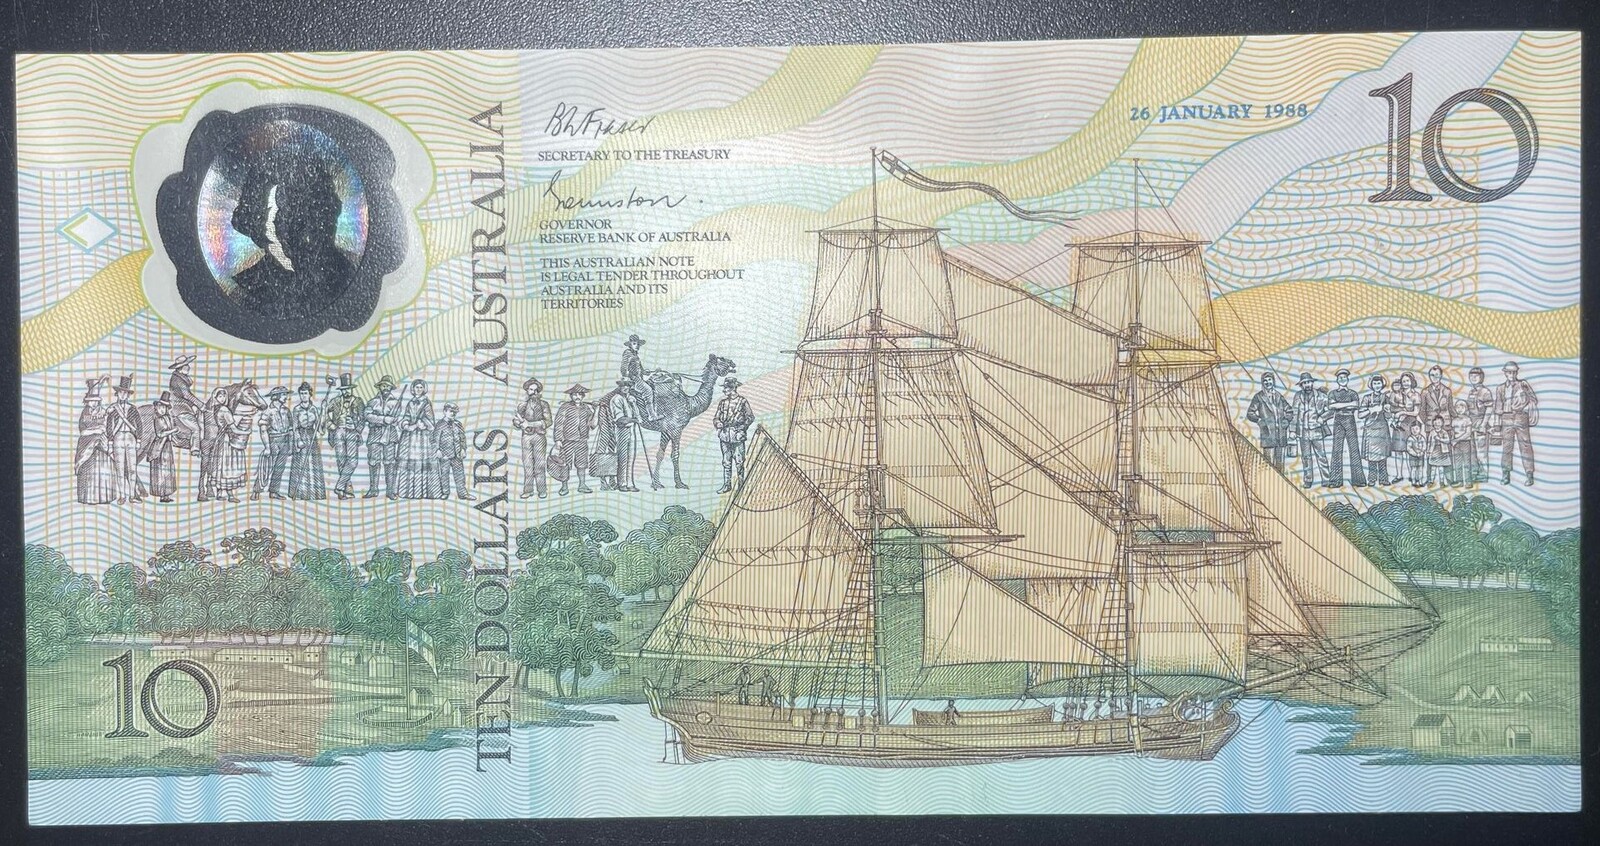 1988 $10 Bicentenary AA09 NPA Blue Folder Collectors Issue Banknote AUNC - No Packaging